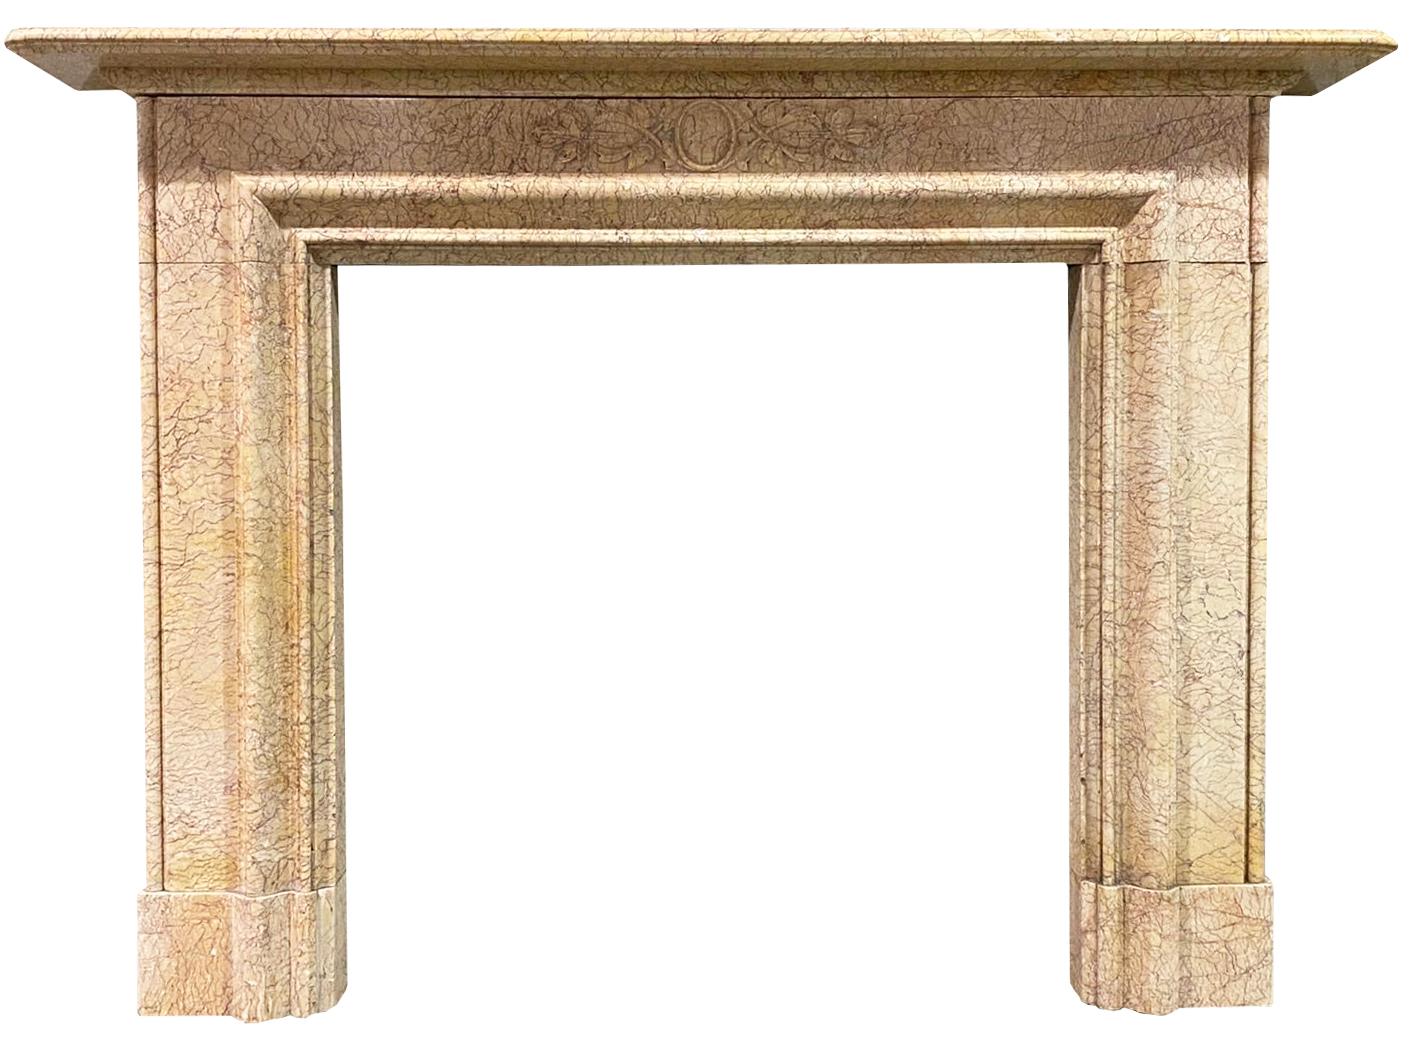 This antique fire surround is constructed from Rosa Valencia marble and features a carved frieze panel. It was reclaimed from a house in Ascot.